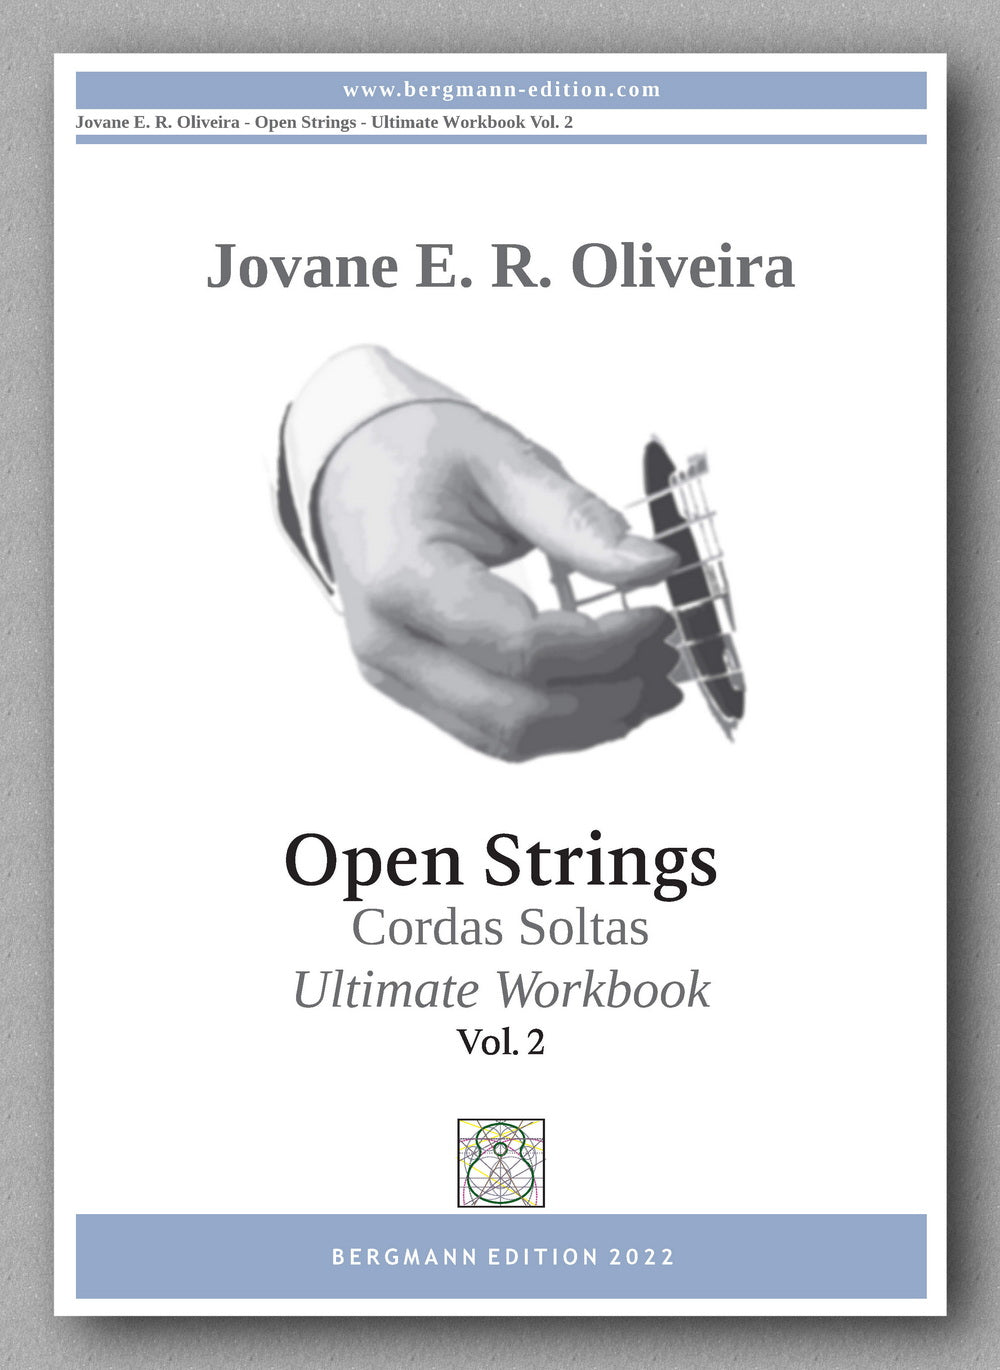 Open Strings, vol. 2 by Jovane E.R. Oliveira - preview of the cover